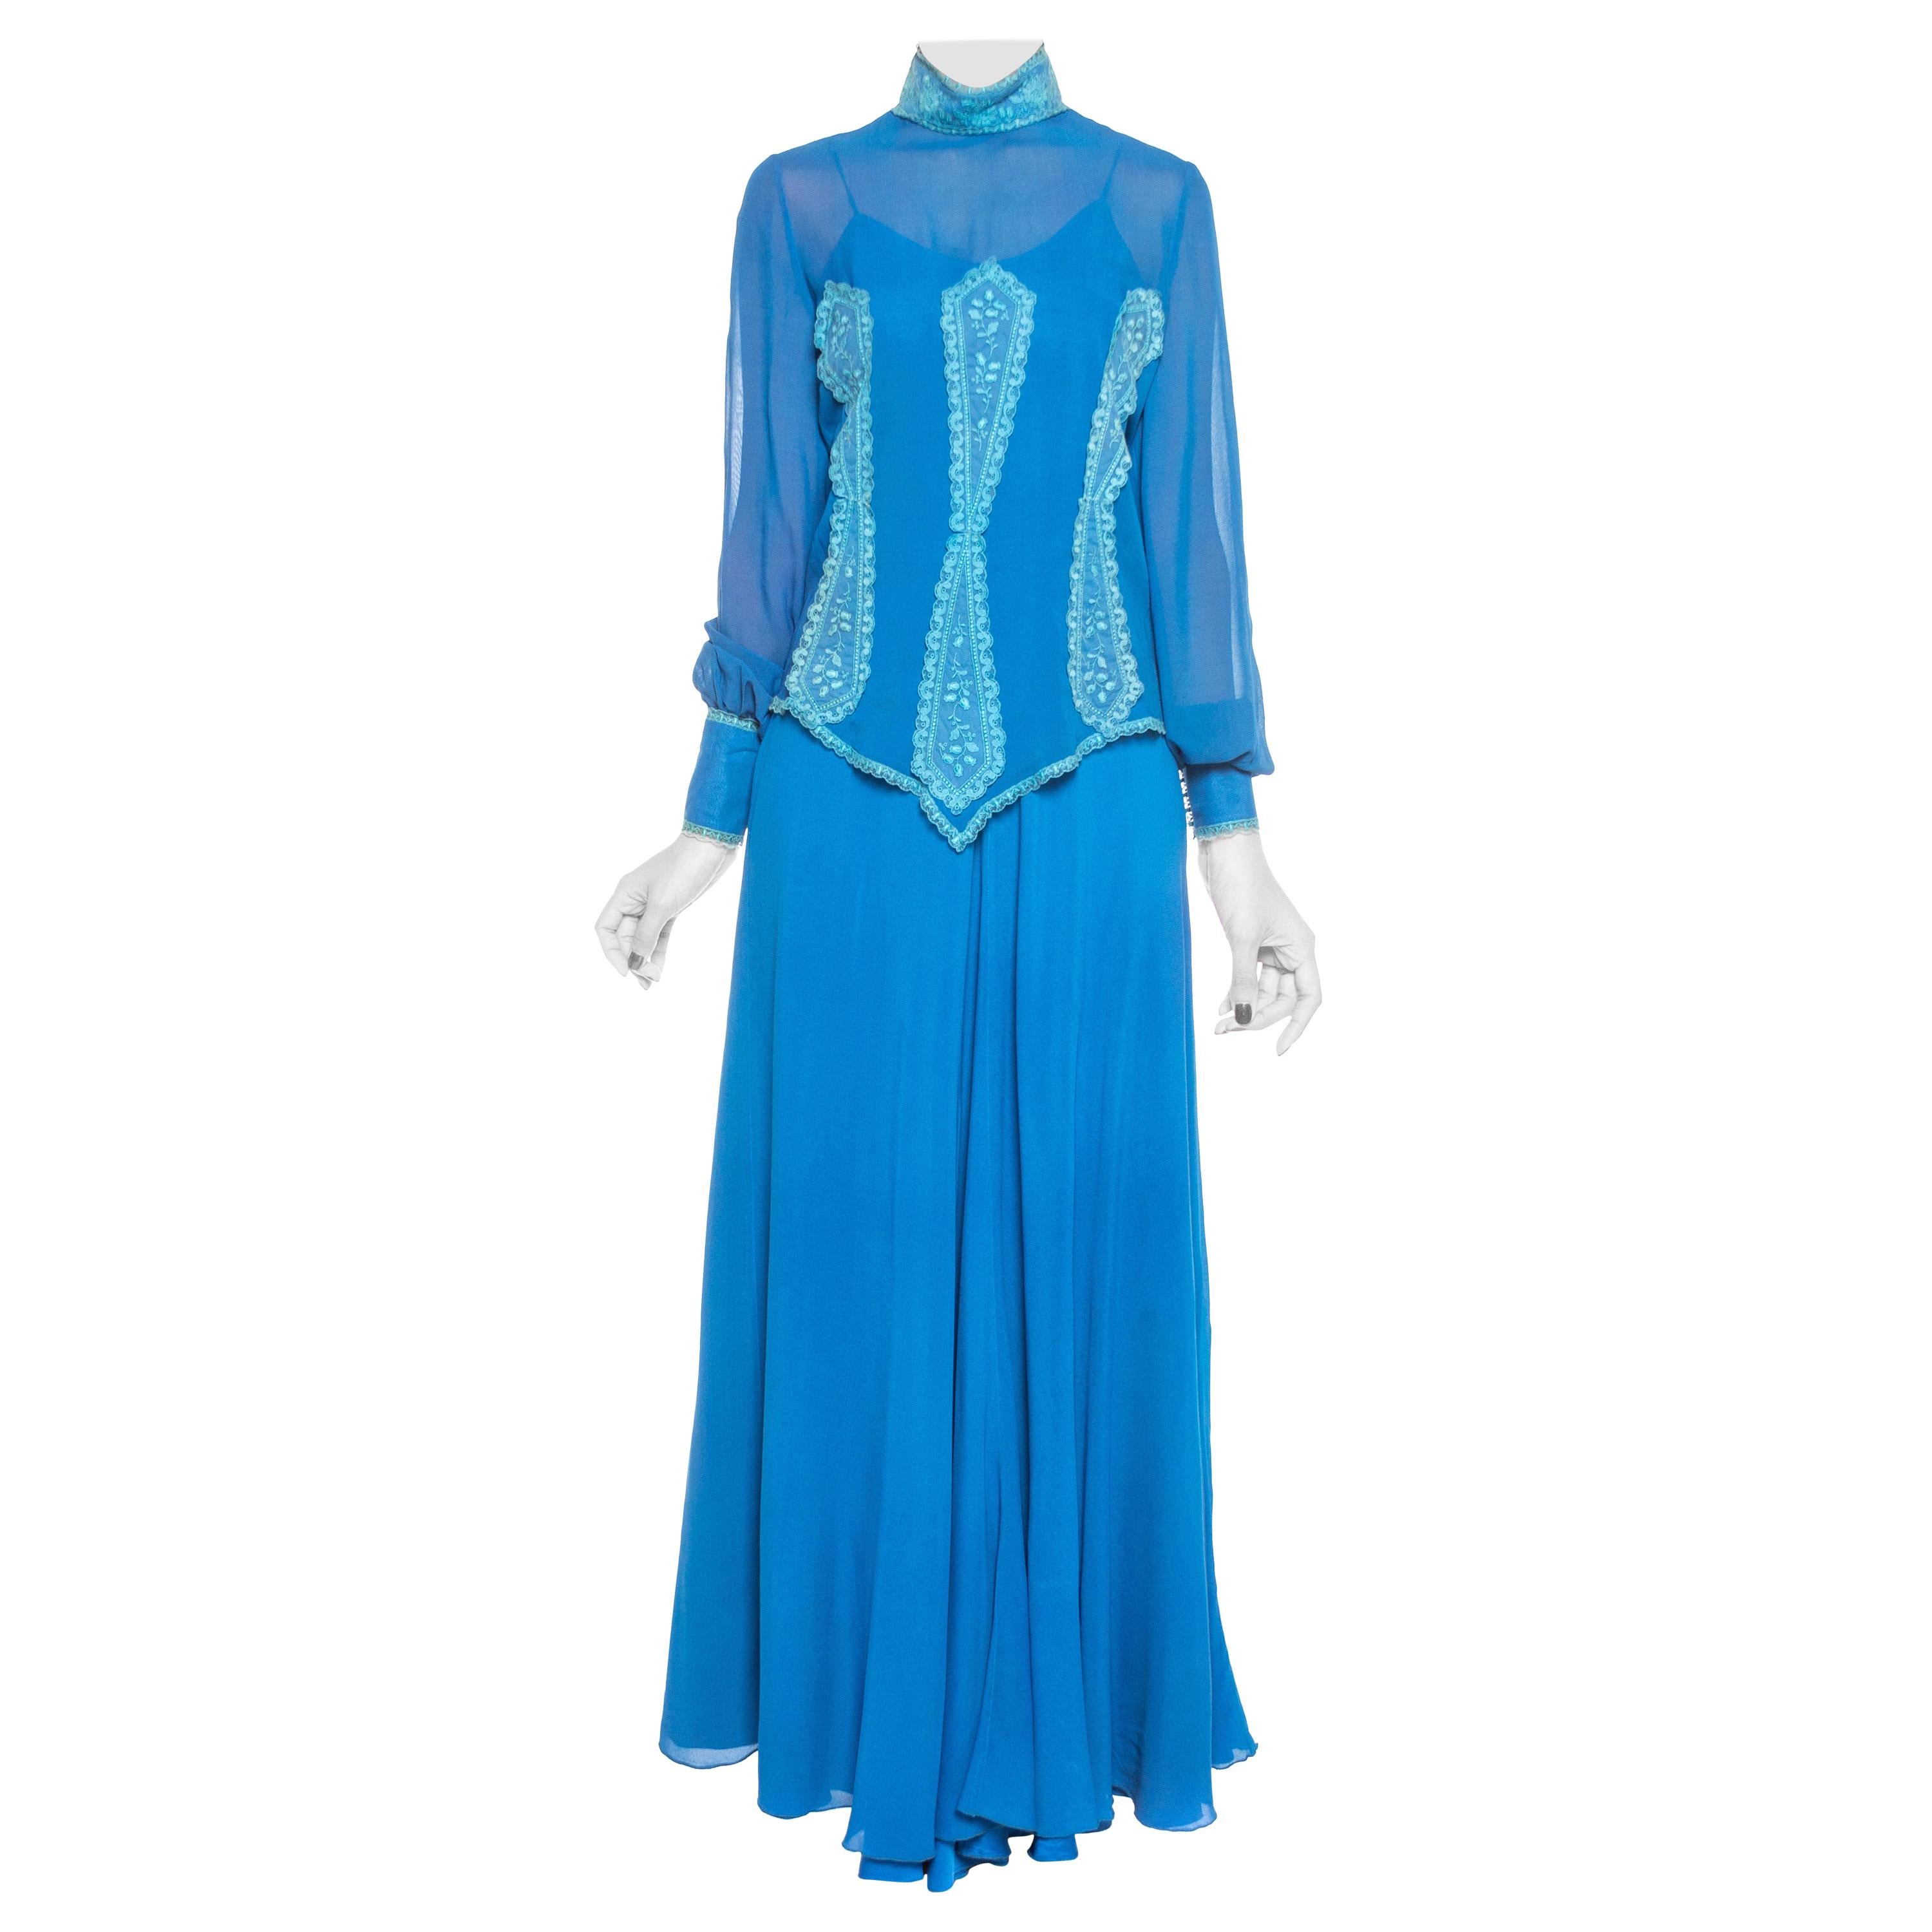 1970S ENZO RUSSO COUTURE Blue Silk Chiffon Victorian Style Dress With Lace Blou For Sale